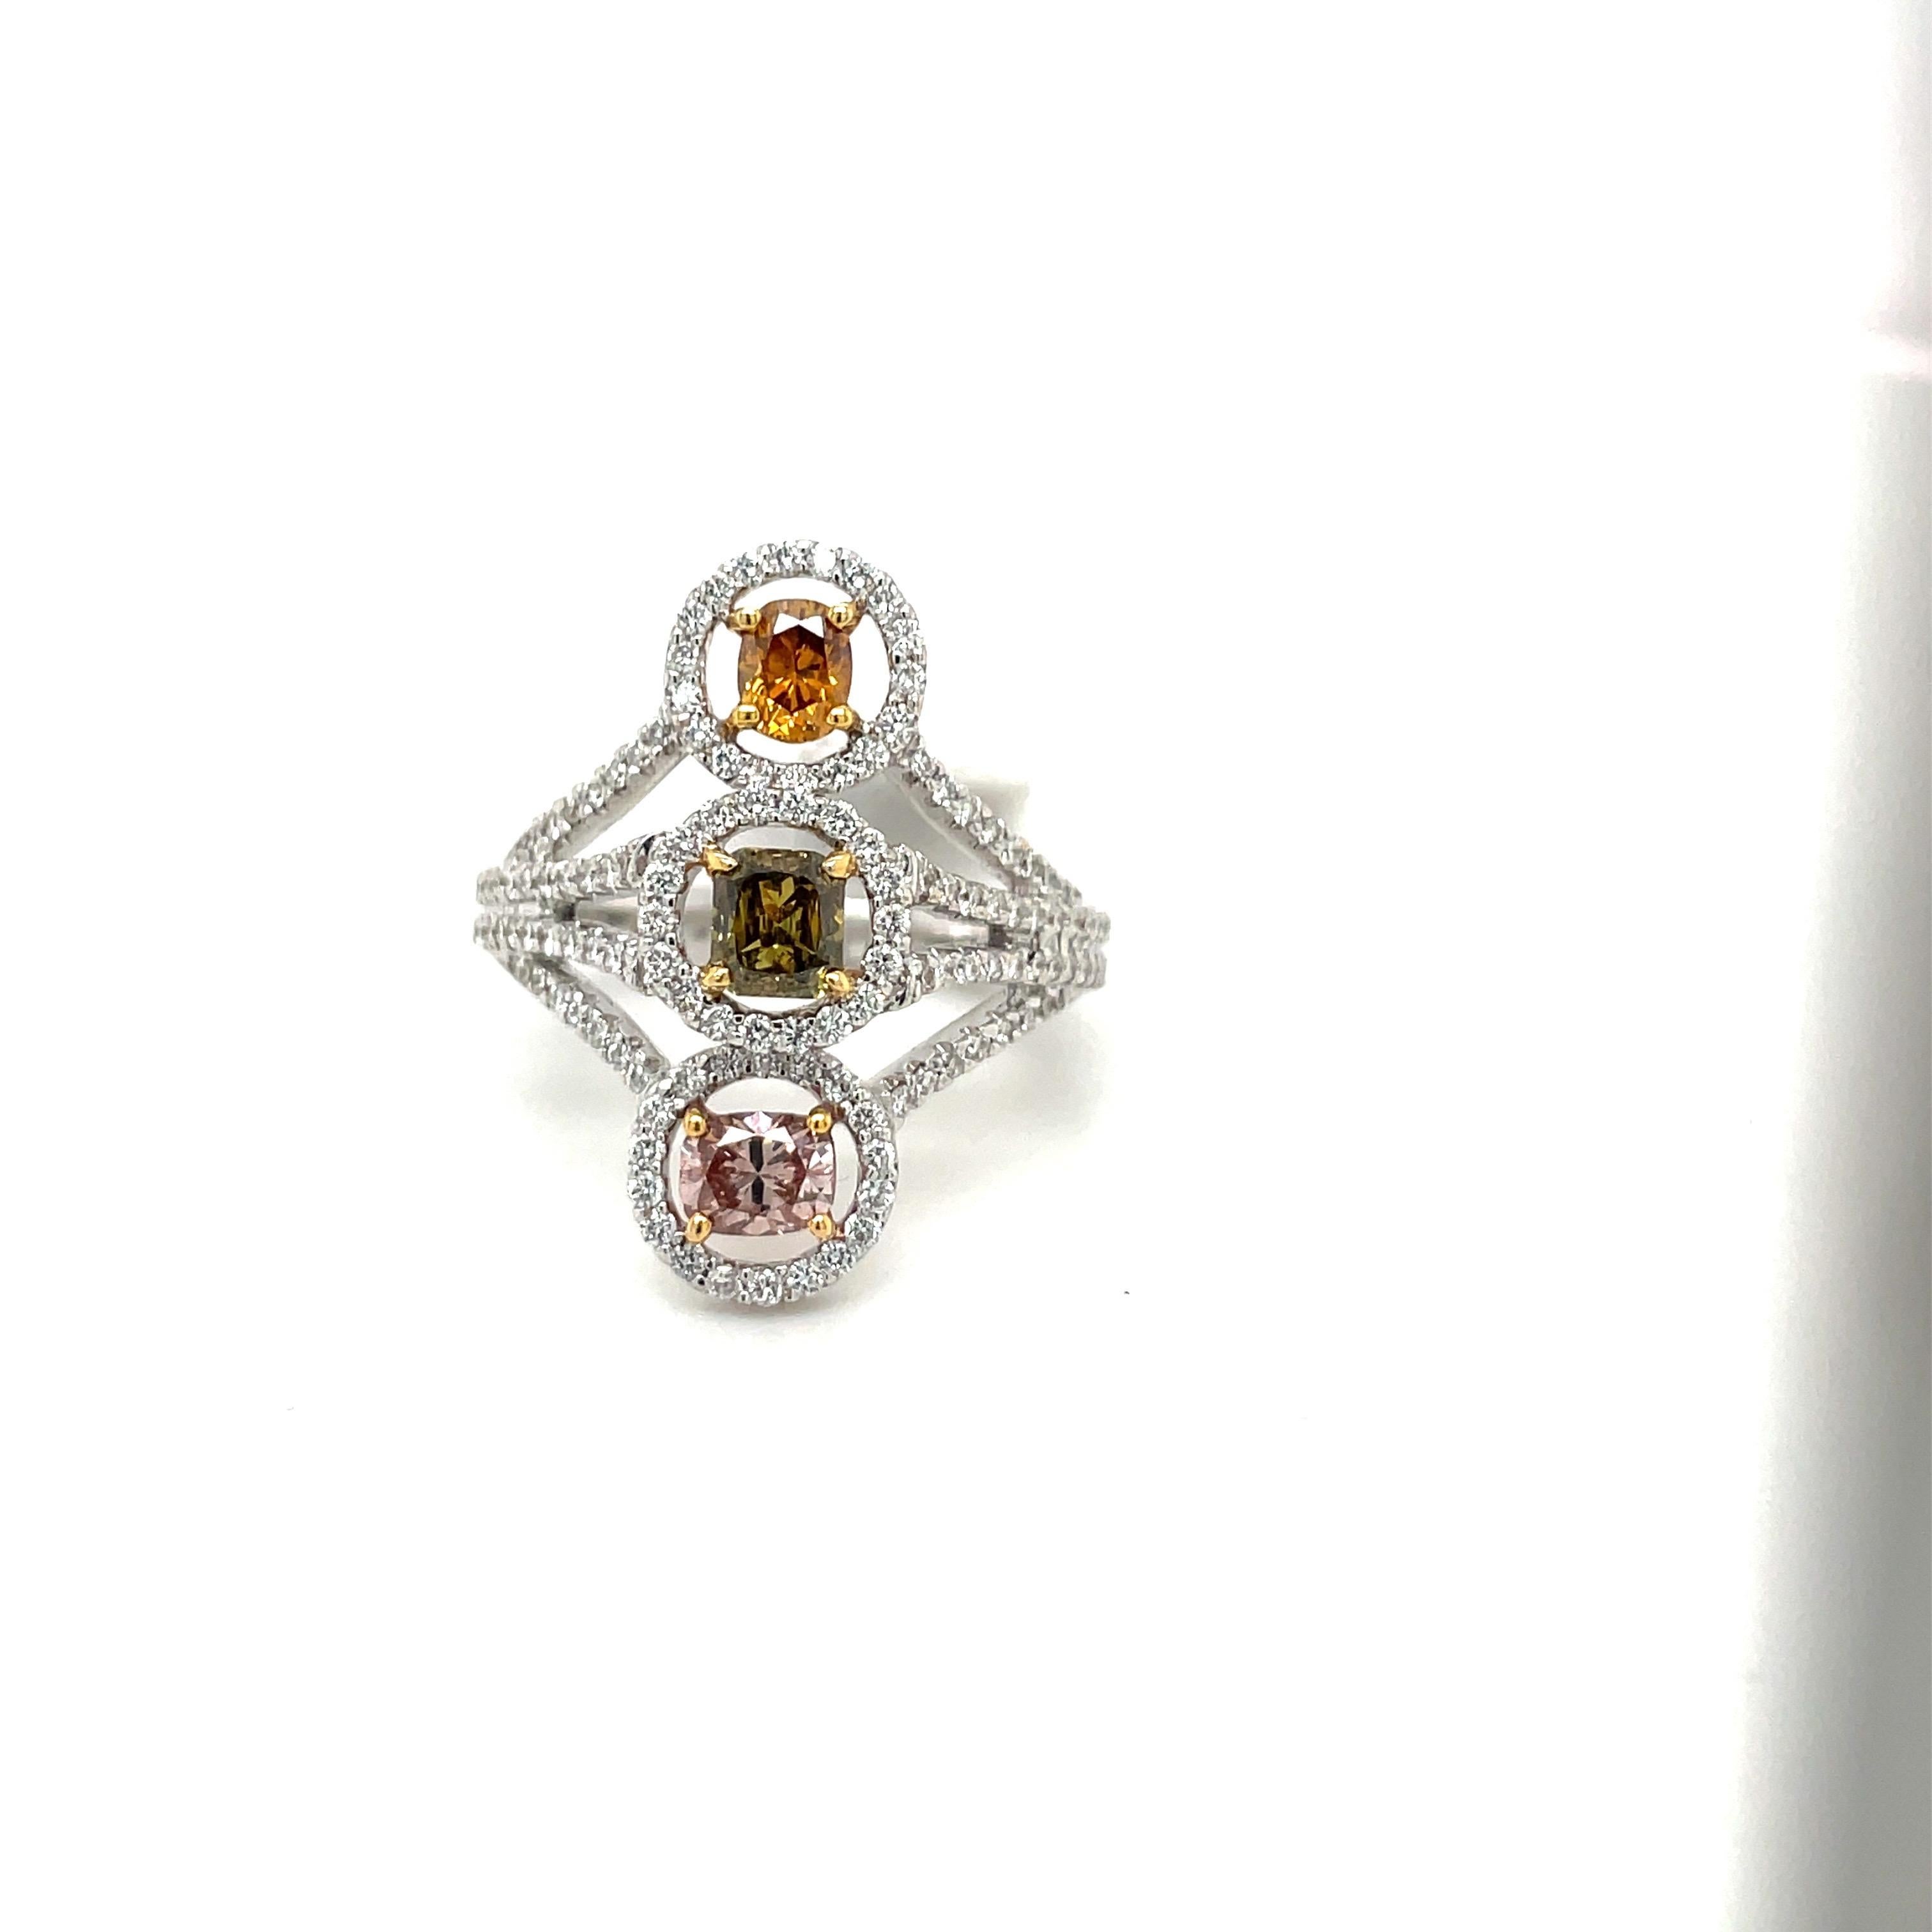 This 18 karat white gold ring is set with 3 fancy colored radiant diamonds. The radiant cut orange , green and pink diamonds have a total weight of 1.02 carats. The setting is white diamonds with a total weight of 0.70 carats.
Ring size 6
Stamped La